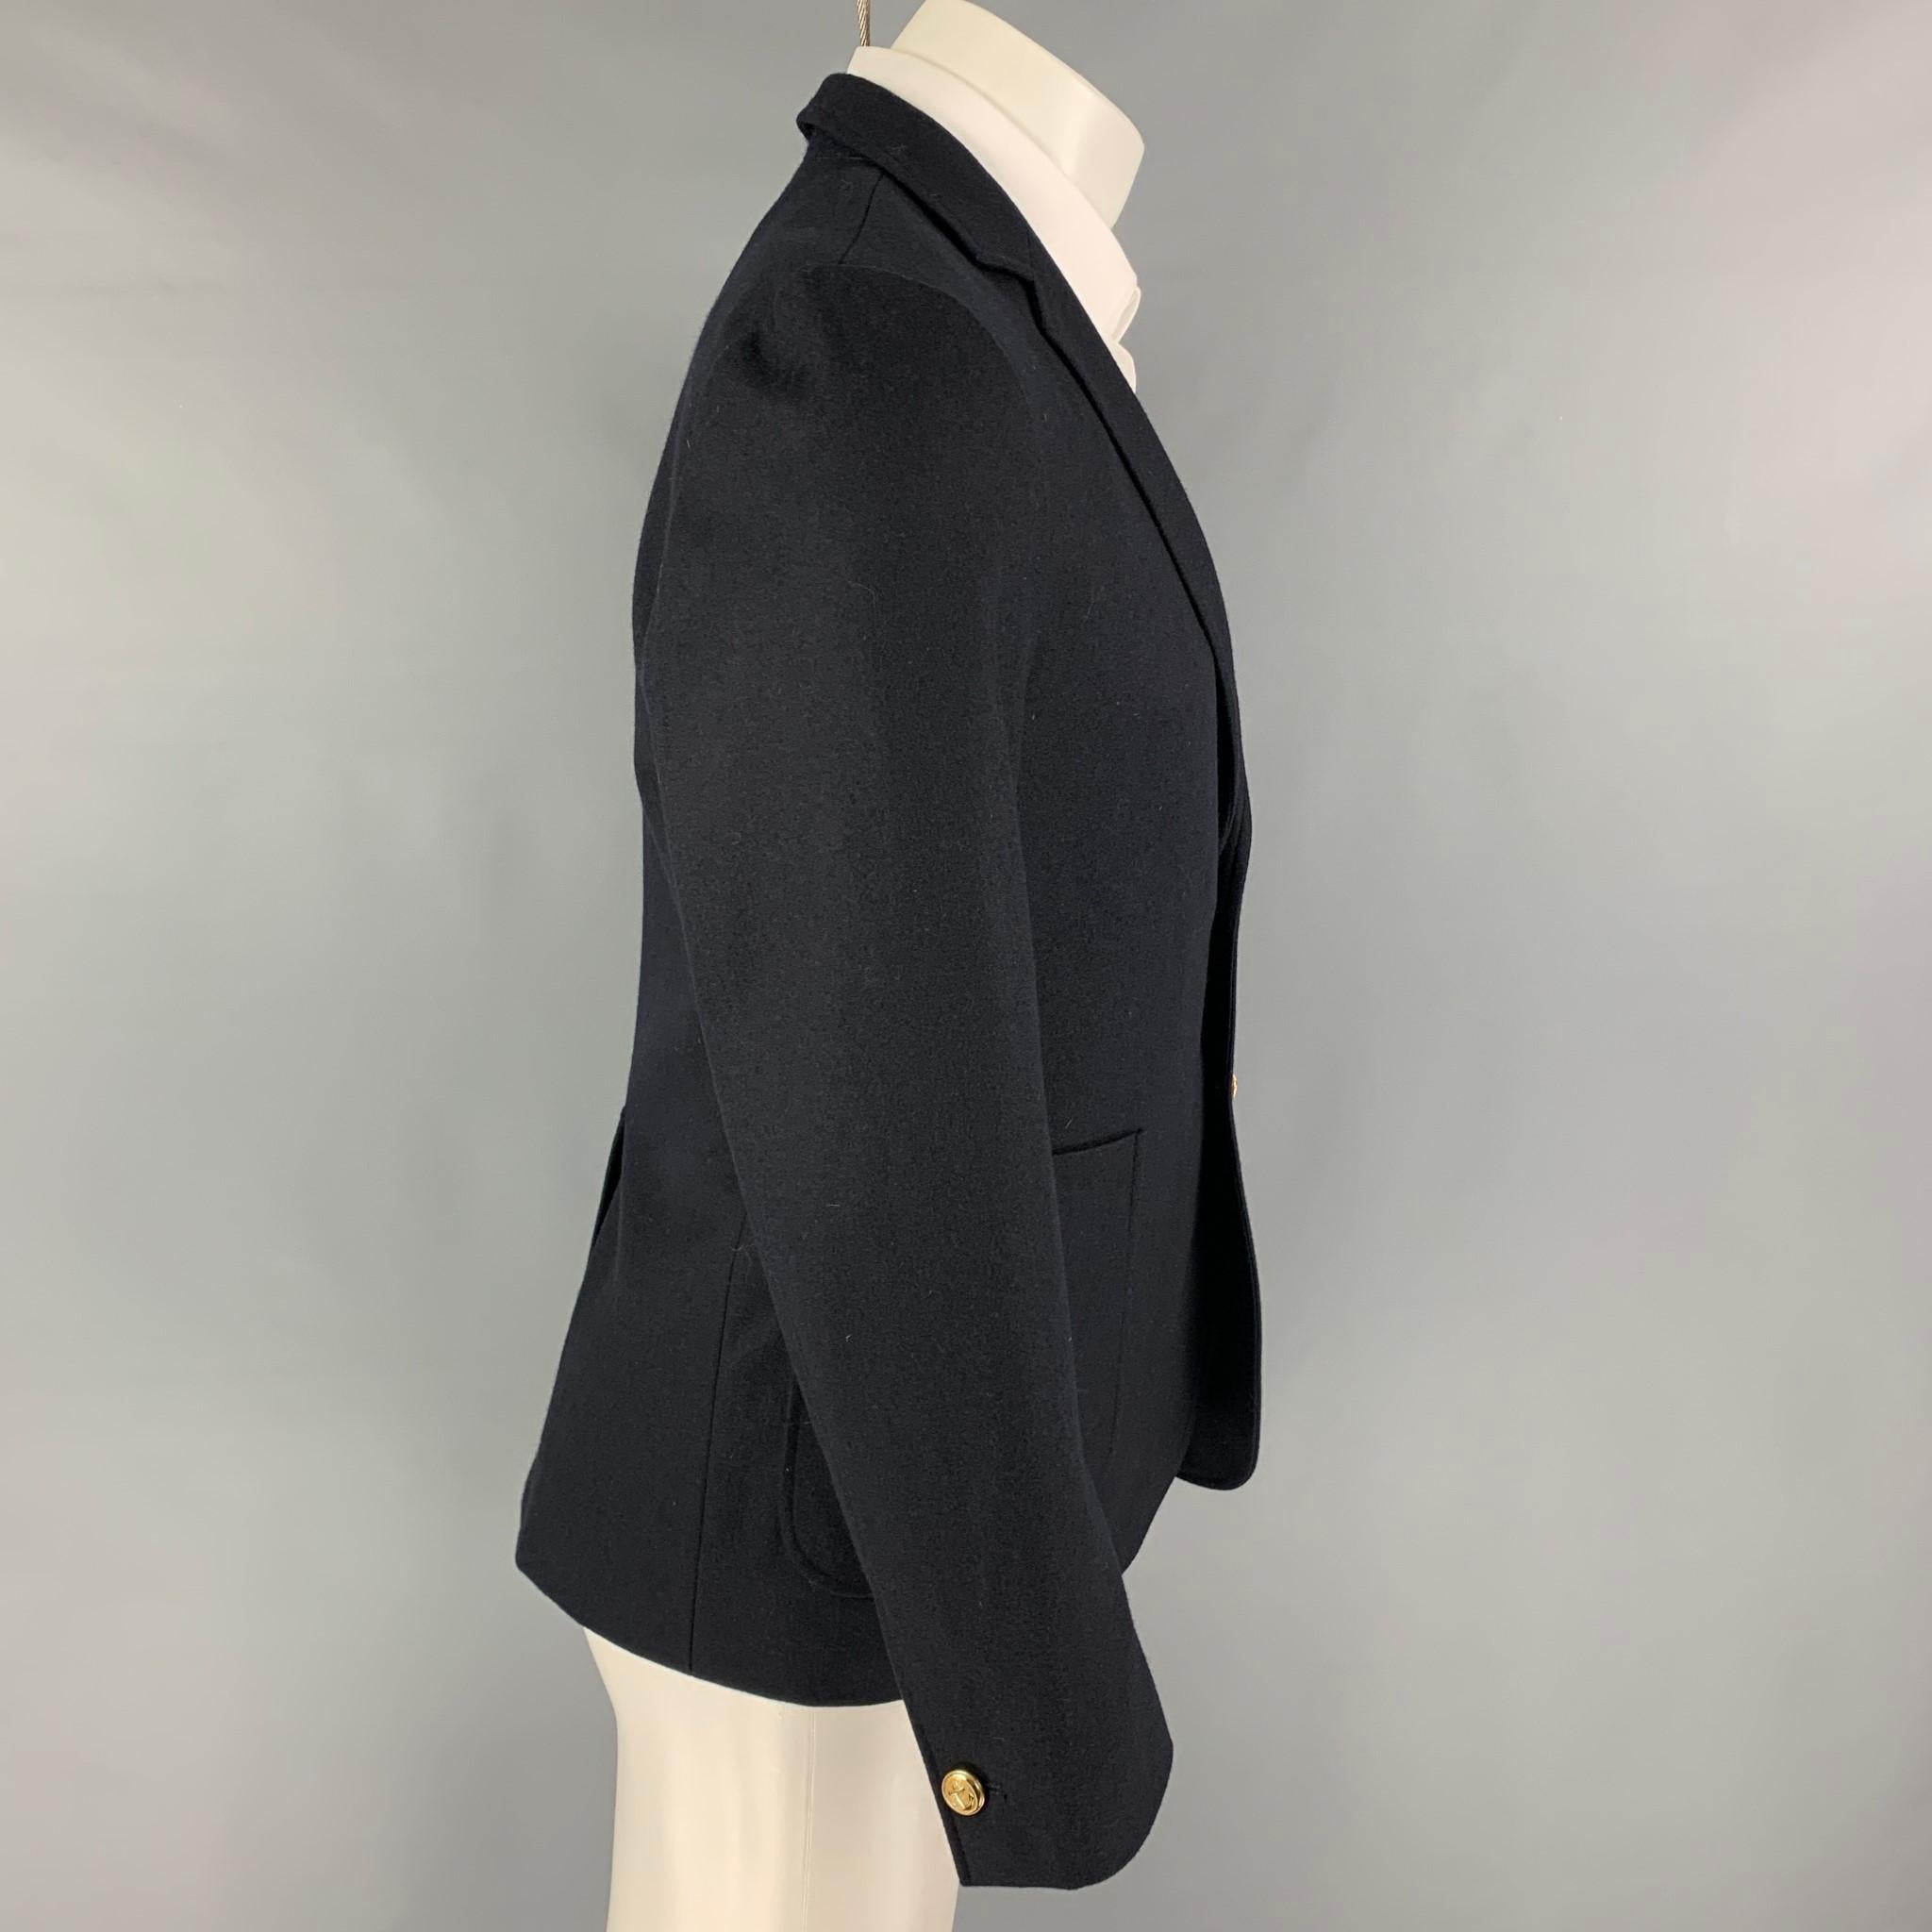 MAISON KITSUNE sport coat comes in a navy wool with a half liner featuring a notch lapel, patch pockets, single back vent, and a double button closure. Made in France.

Excellent Pre-Owned Condition.
Marked: 48

Measurements:

Shoulder: 16.5